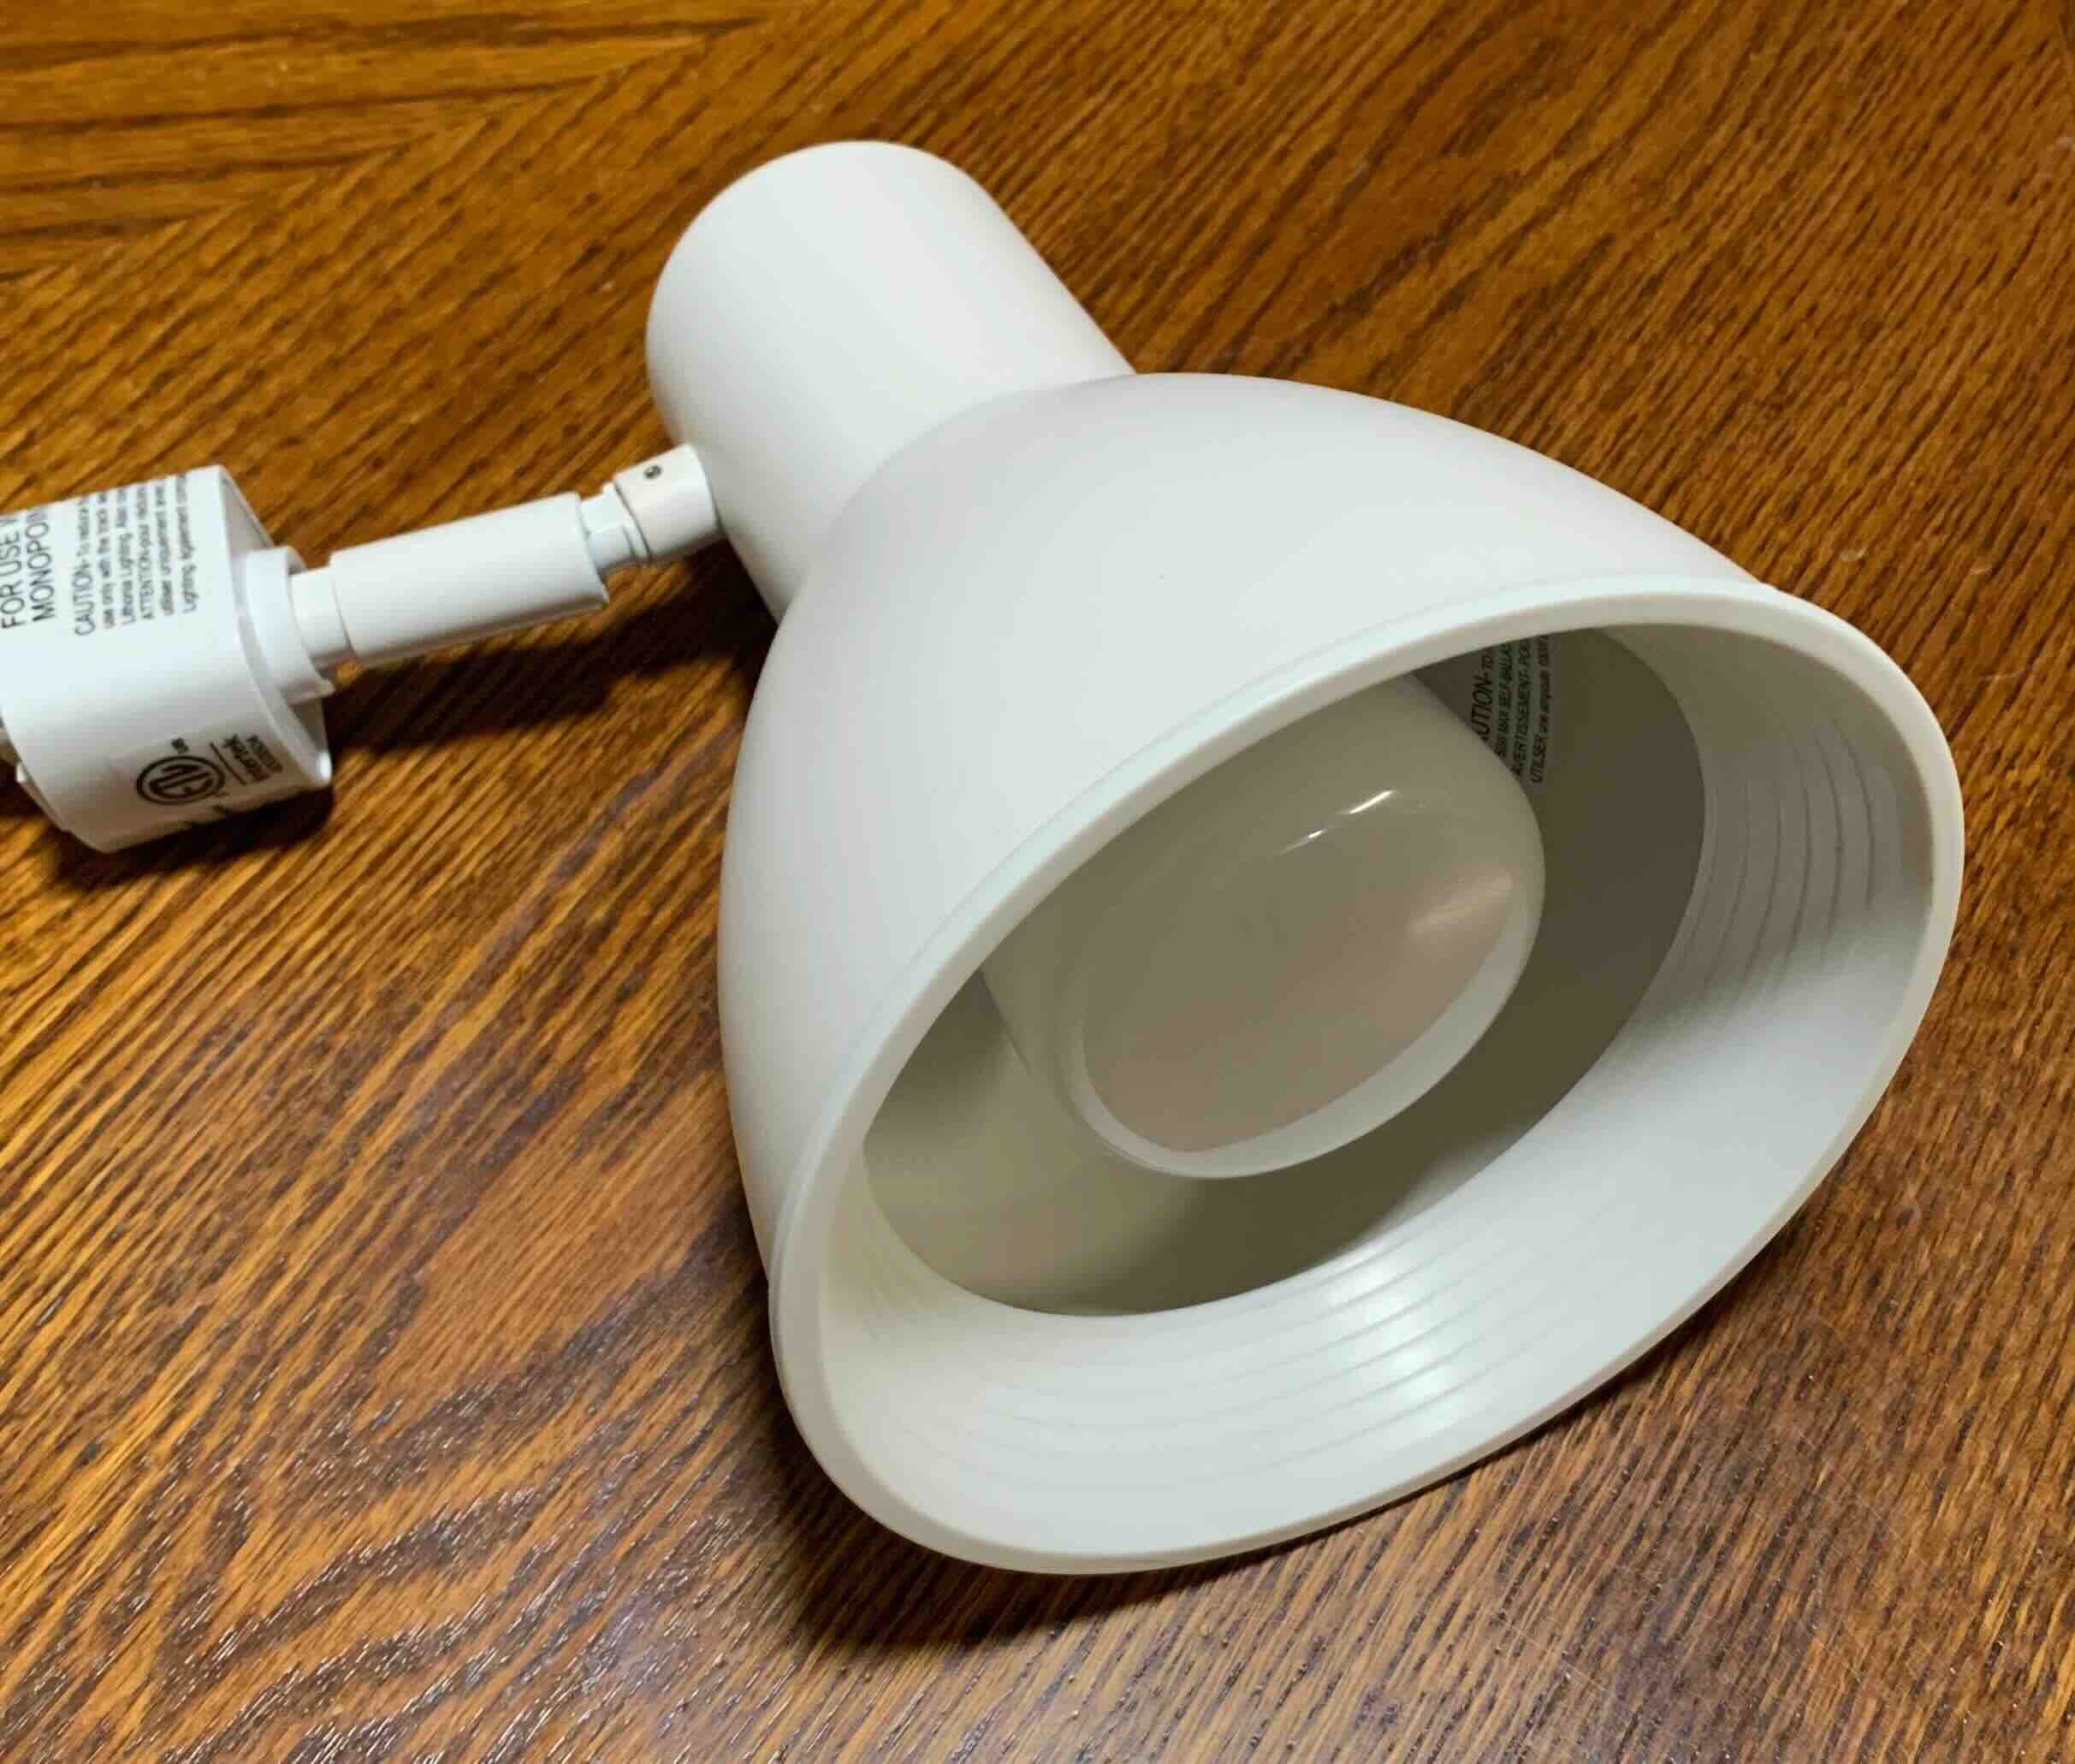 How To Diffuse A Lamp Light